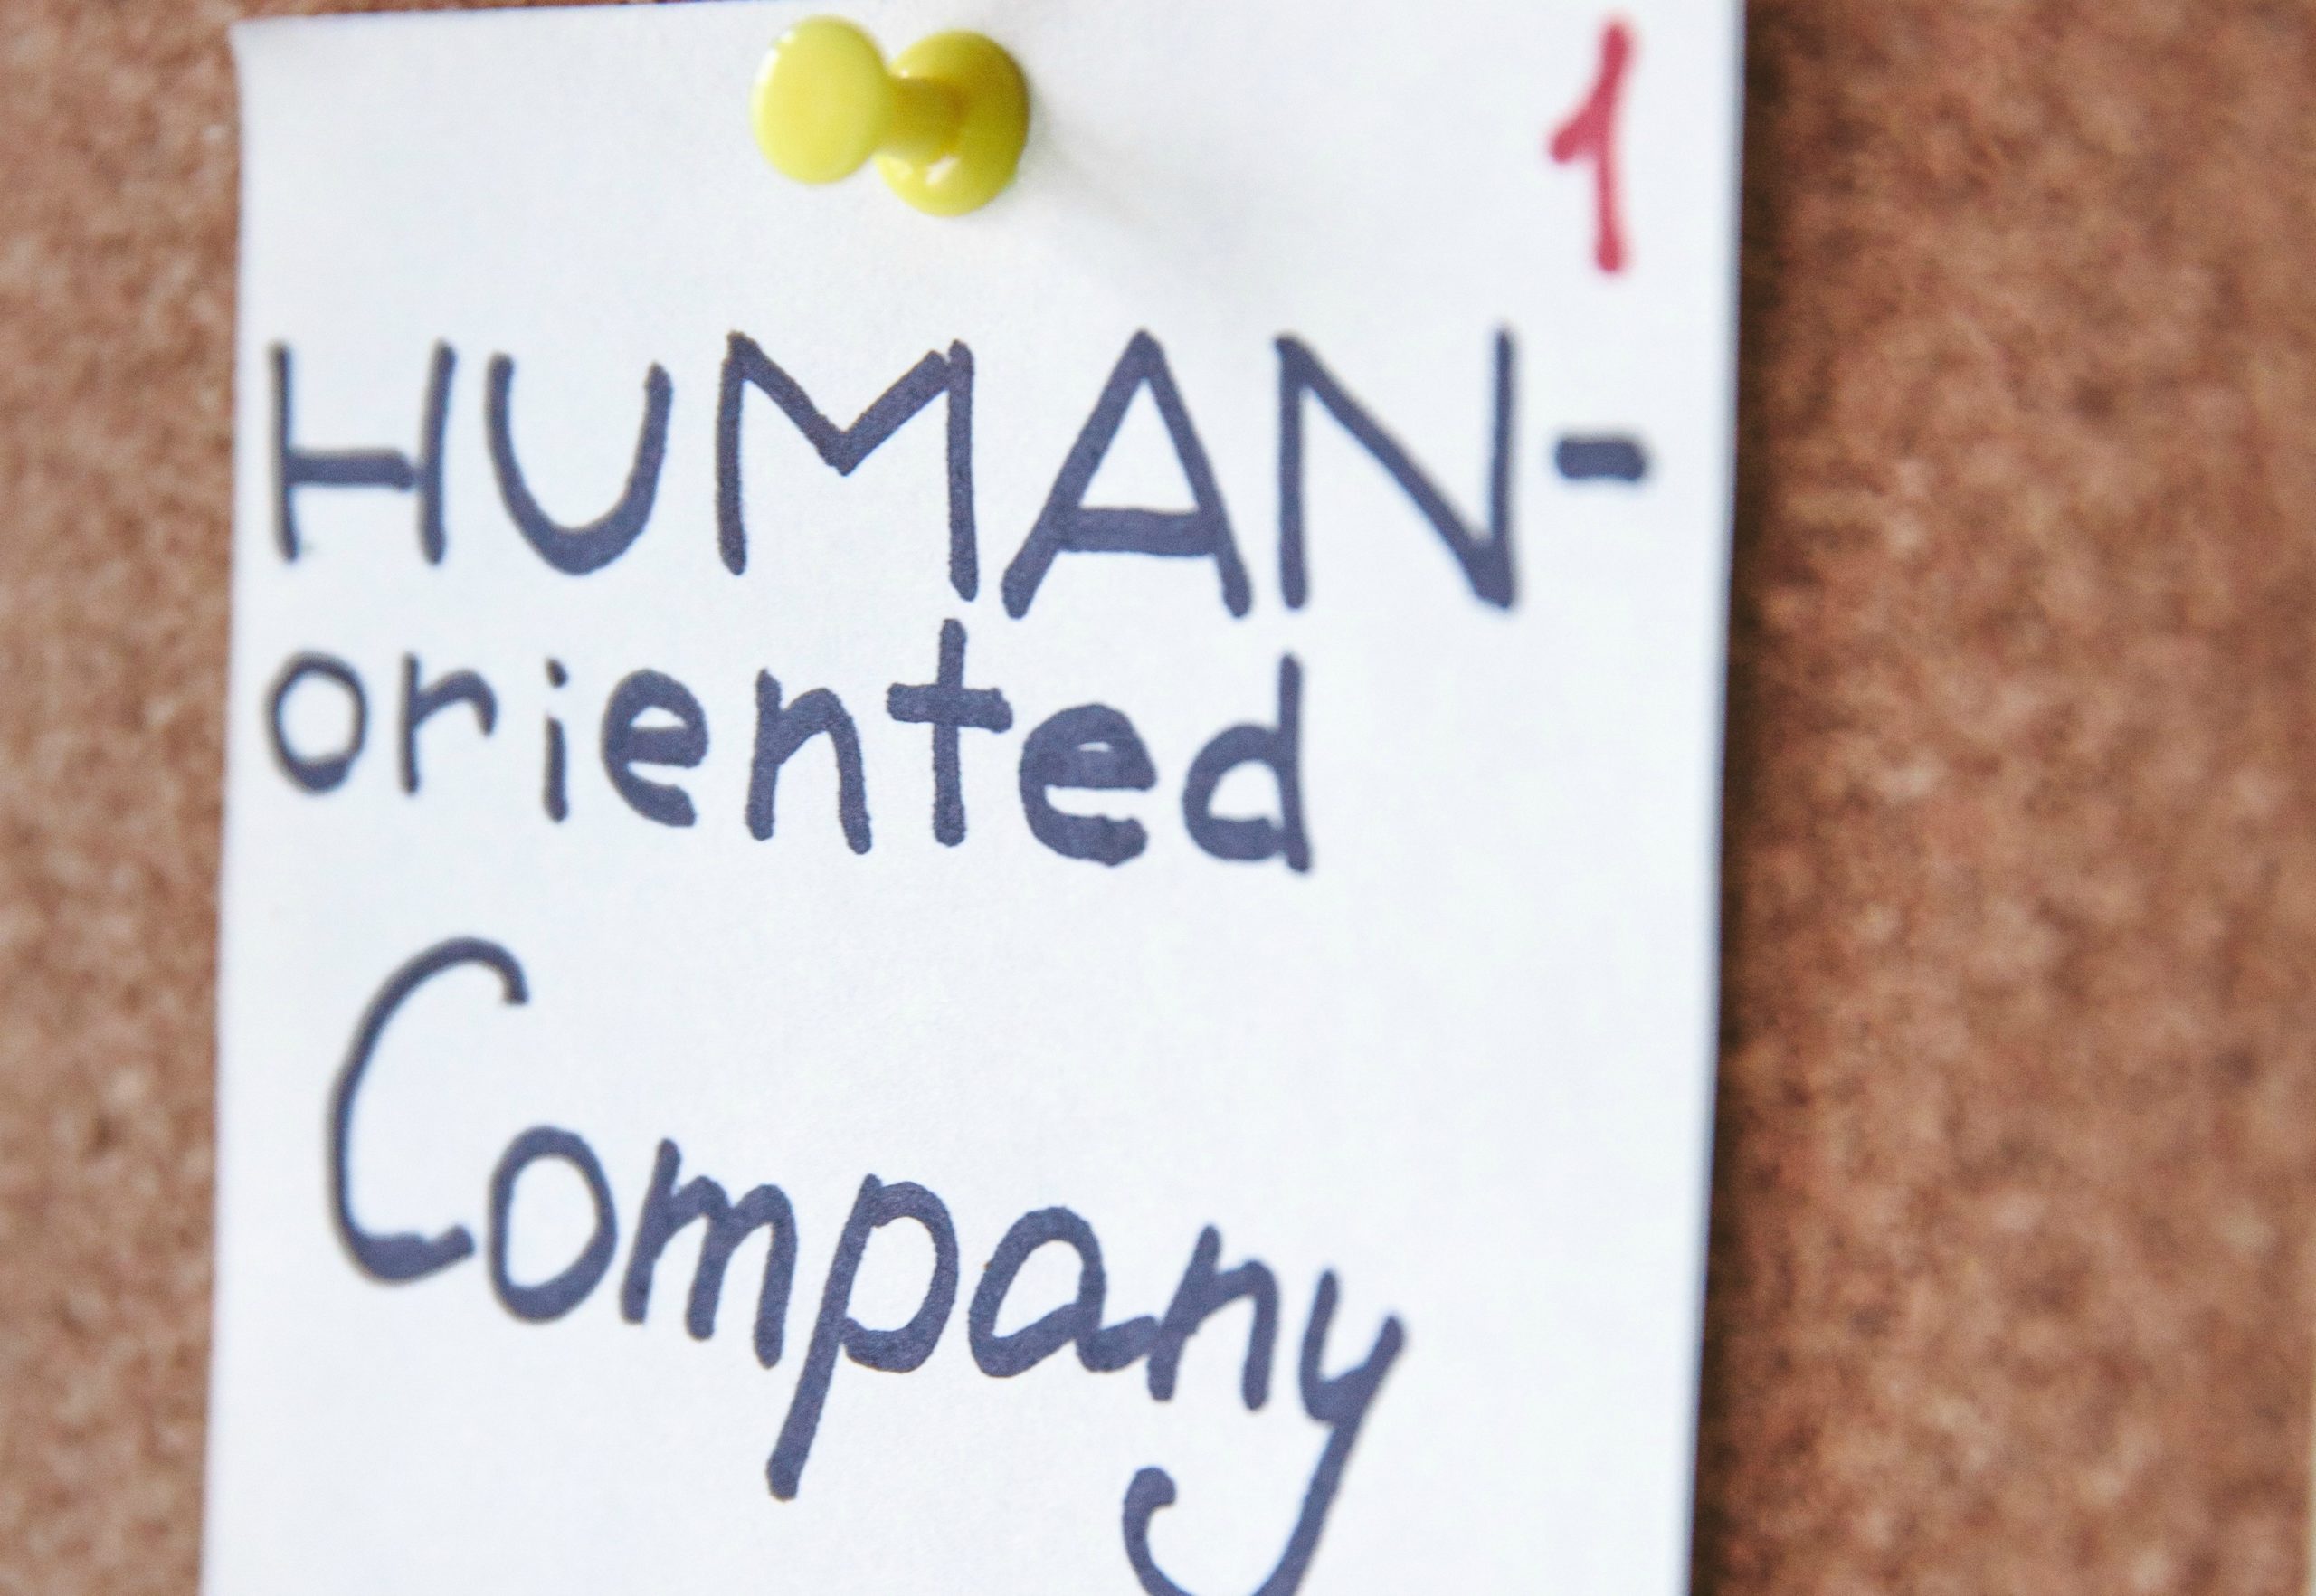 Hire the talent you need by getting your company's brand right